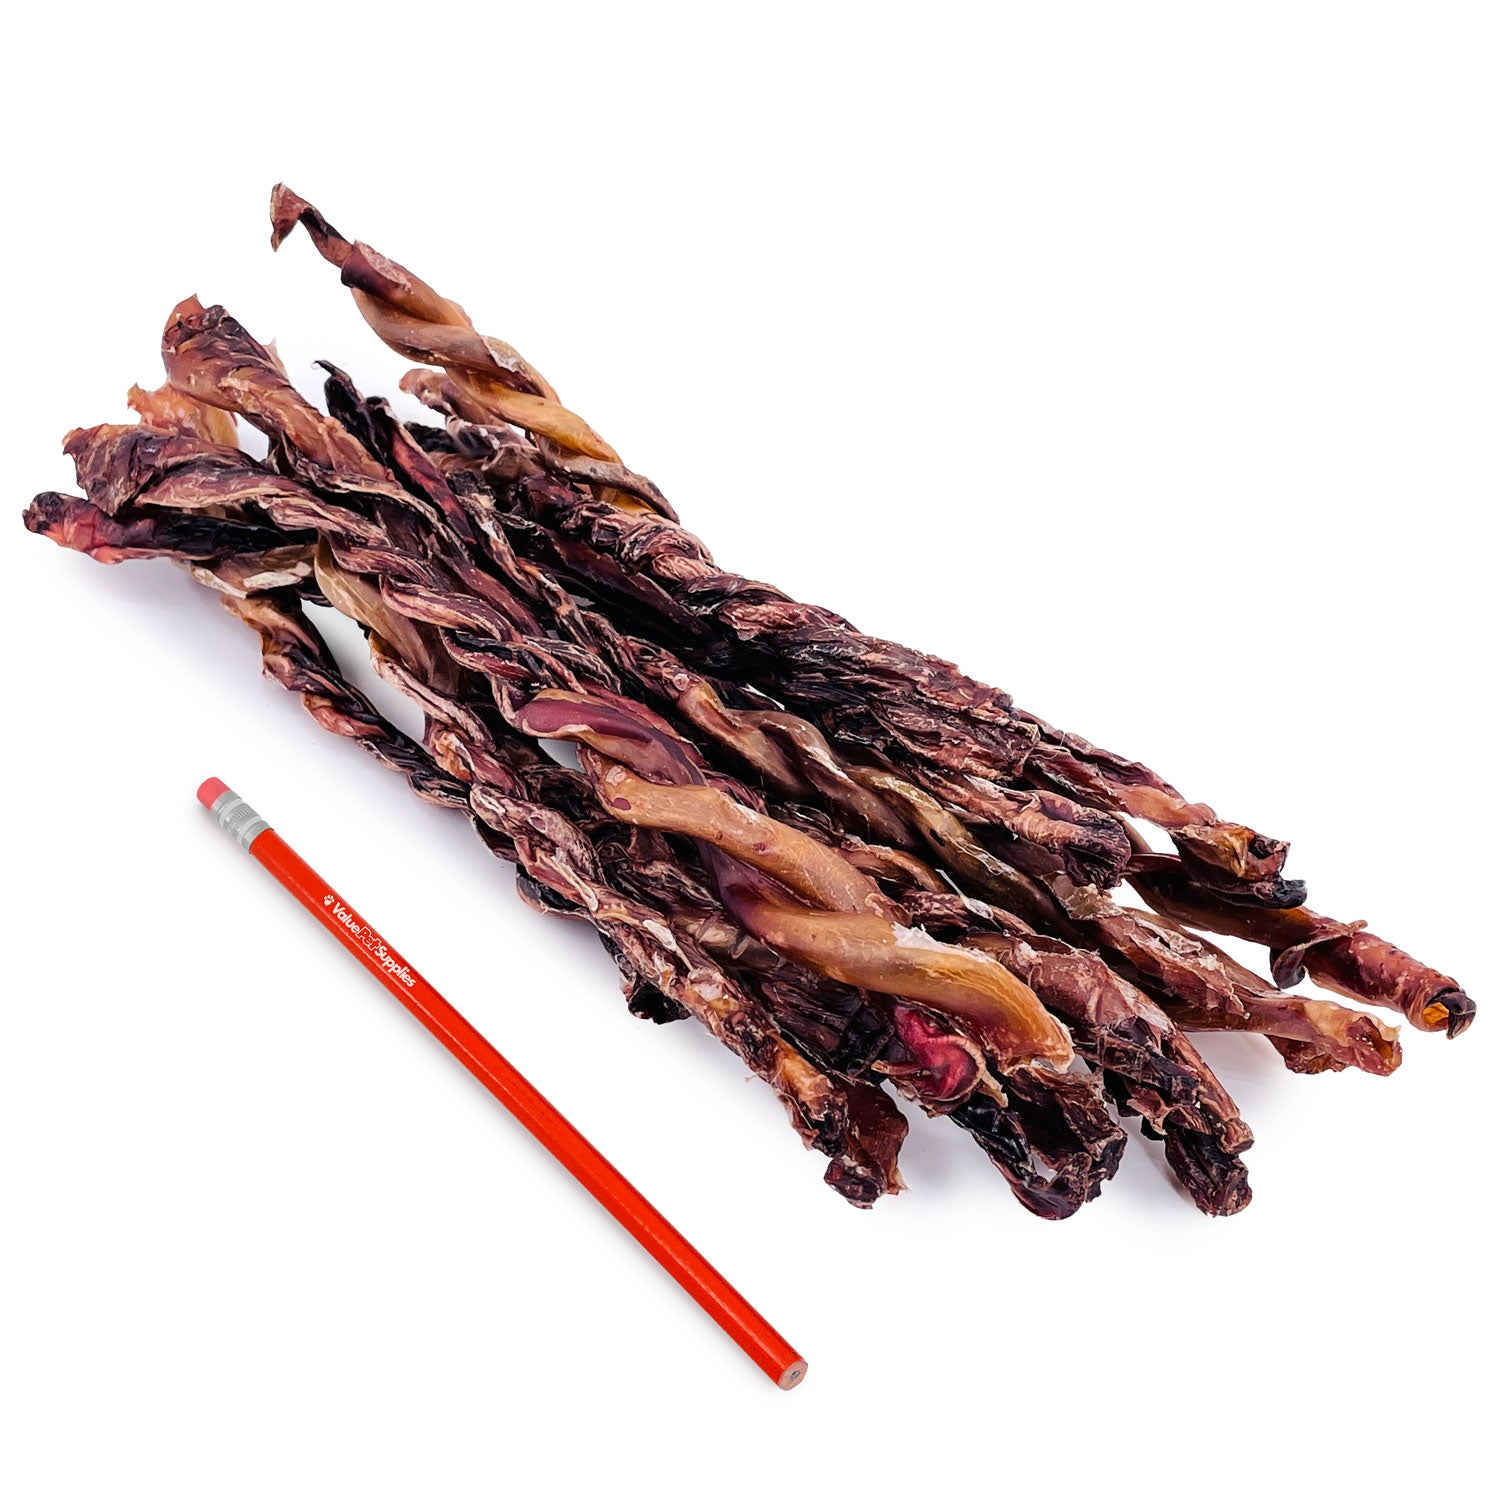 ValueBull USA Pork Pizzle Twists for Dogs, 10-12", 300 ct BULK PACK